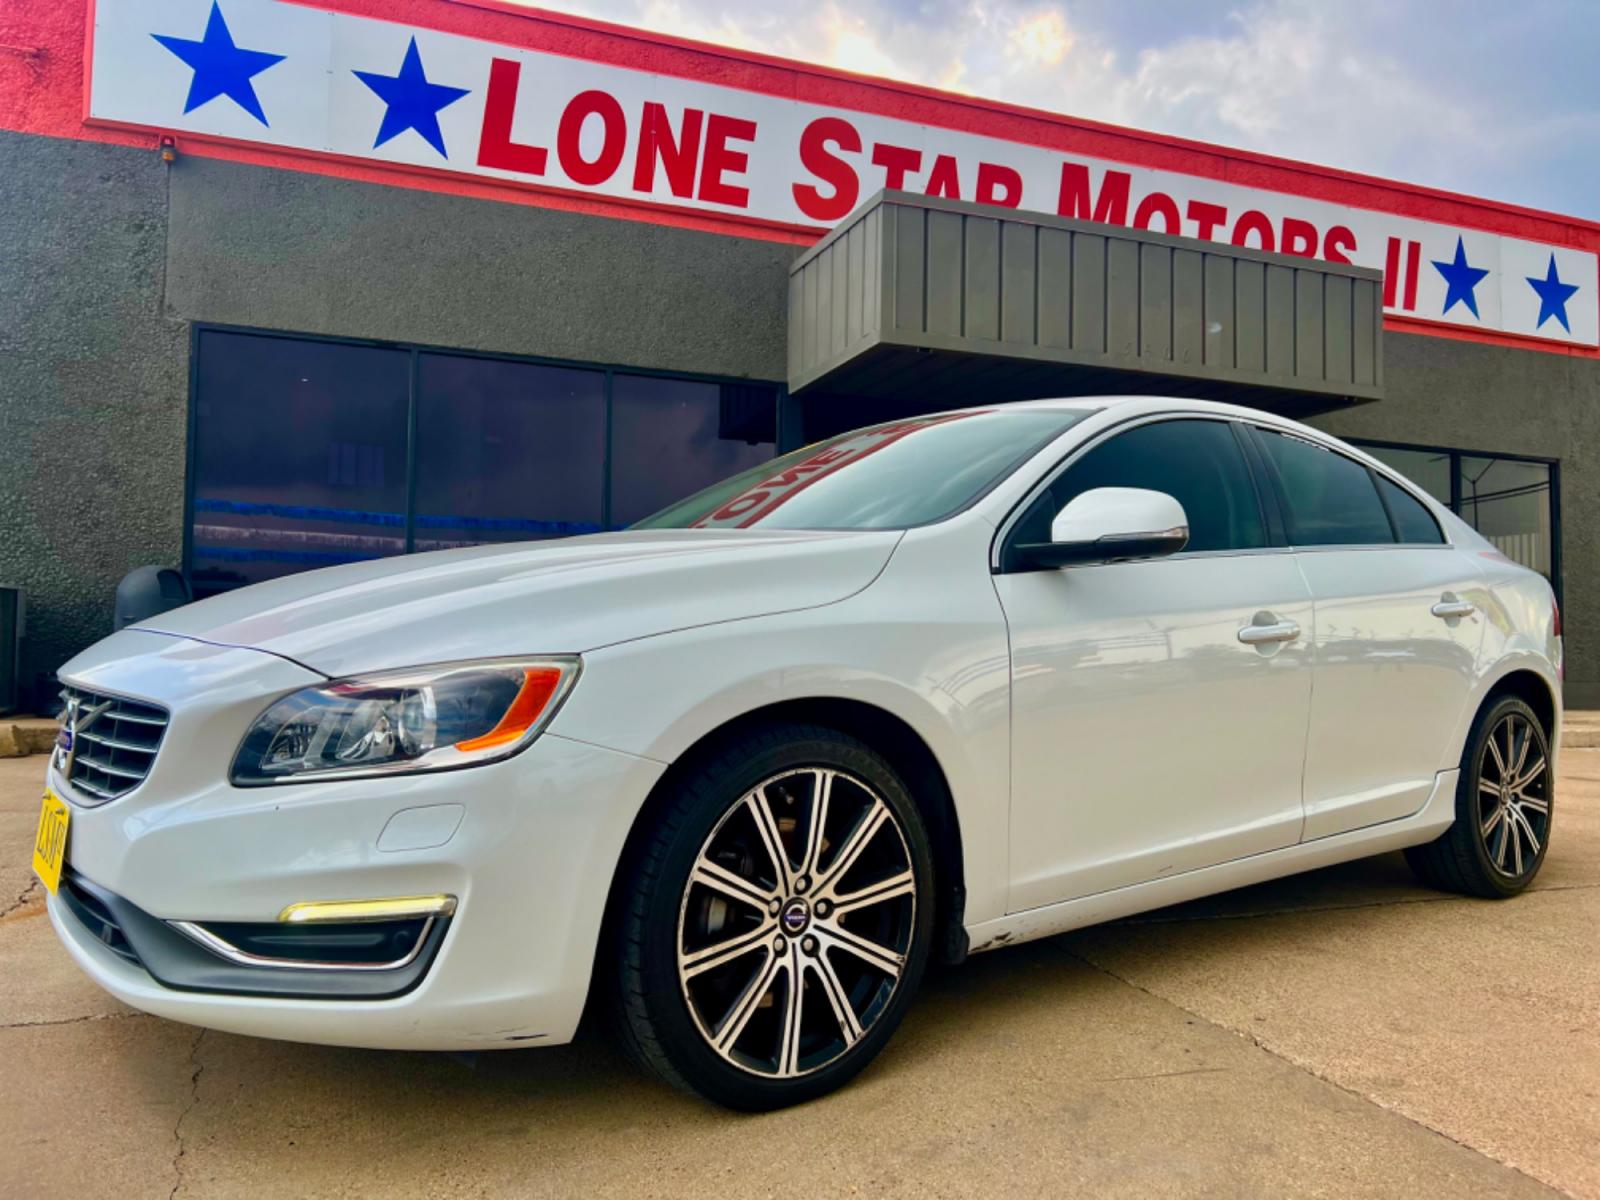 2014 WHITE VOLVO S60 T5 (YV1612FS1E2) , located at 5900 E. Lancaster Ave., Fort Worth, TX, 76112, (817) 457-5456, 0.000000, 0.000000 - This is a 2014 VOLVO S60 T5 4 DOOR SEDAN that is in excellent condition. There are no dents or scratches. The interior is clean with no rips or tears or stains. All power windows, door locks and seats. Ice cold AC for those hot Texas summer days. It is equipped with a CD player, AM/FM radio, AUX por - Photo #1